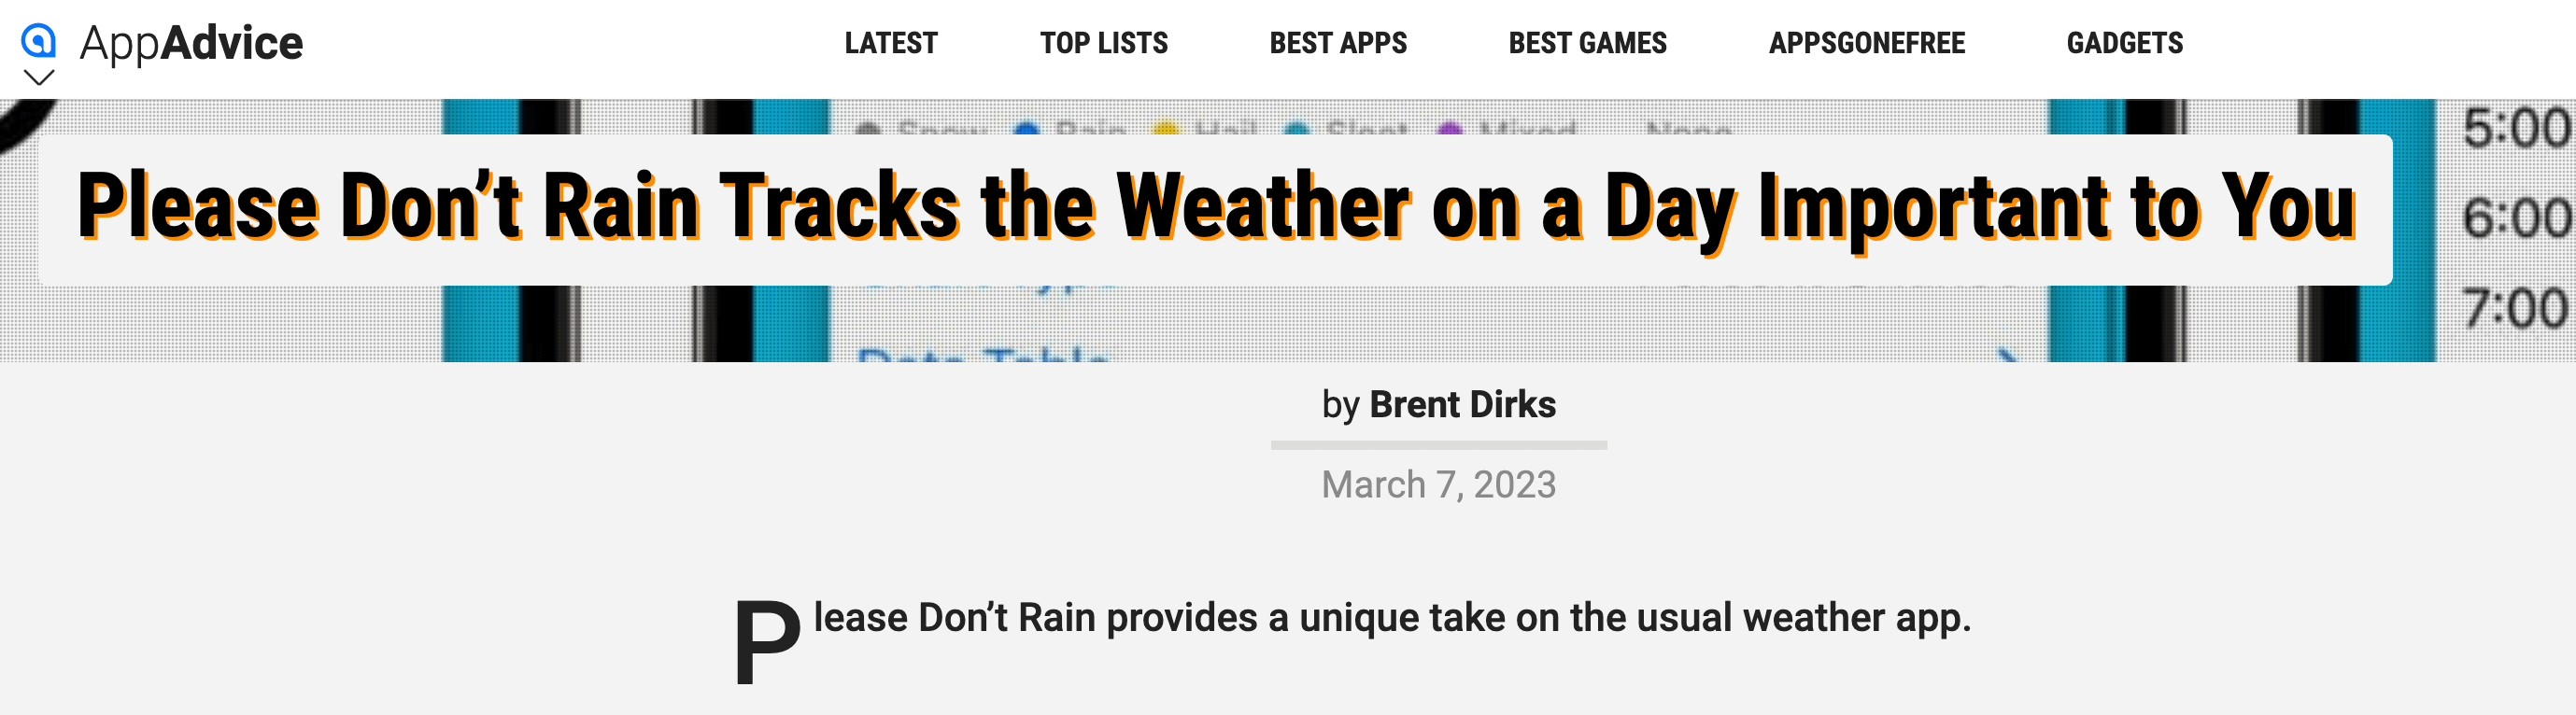 &ldquo;Please Don&rsquo;t Rain tracks the weather on a day important to you&rdquo; is title of the review.